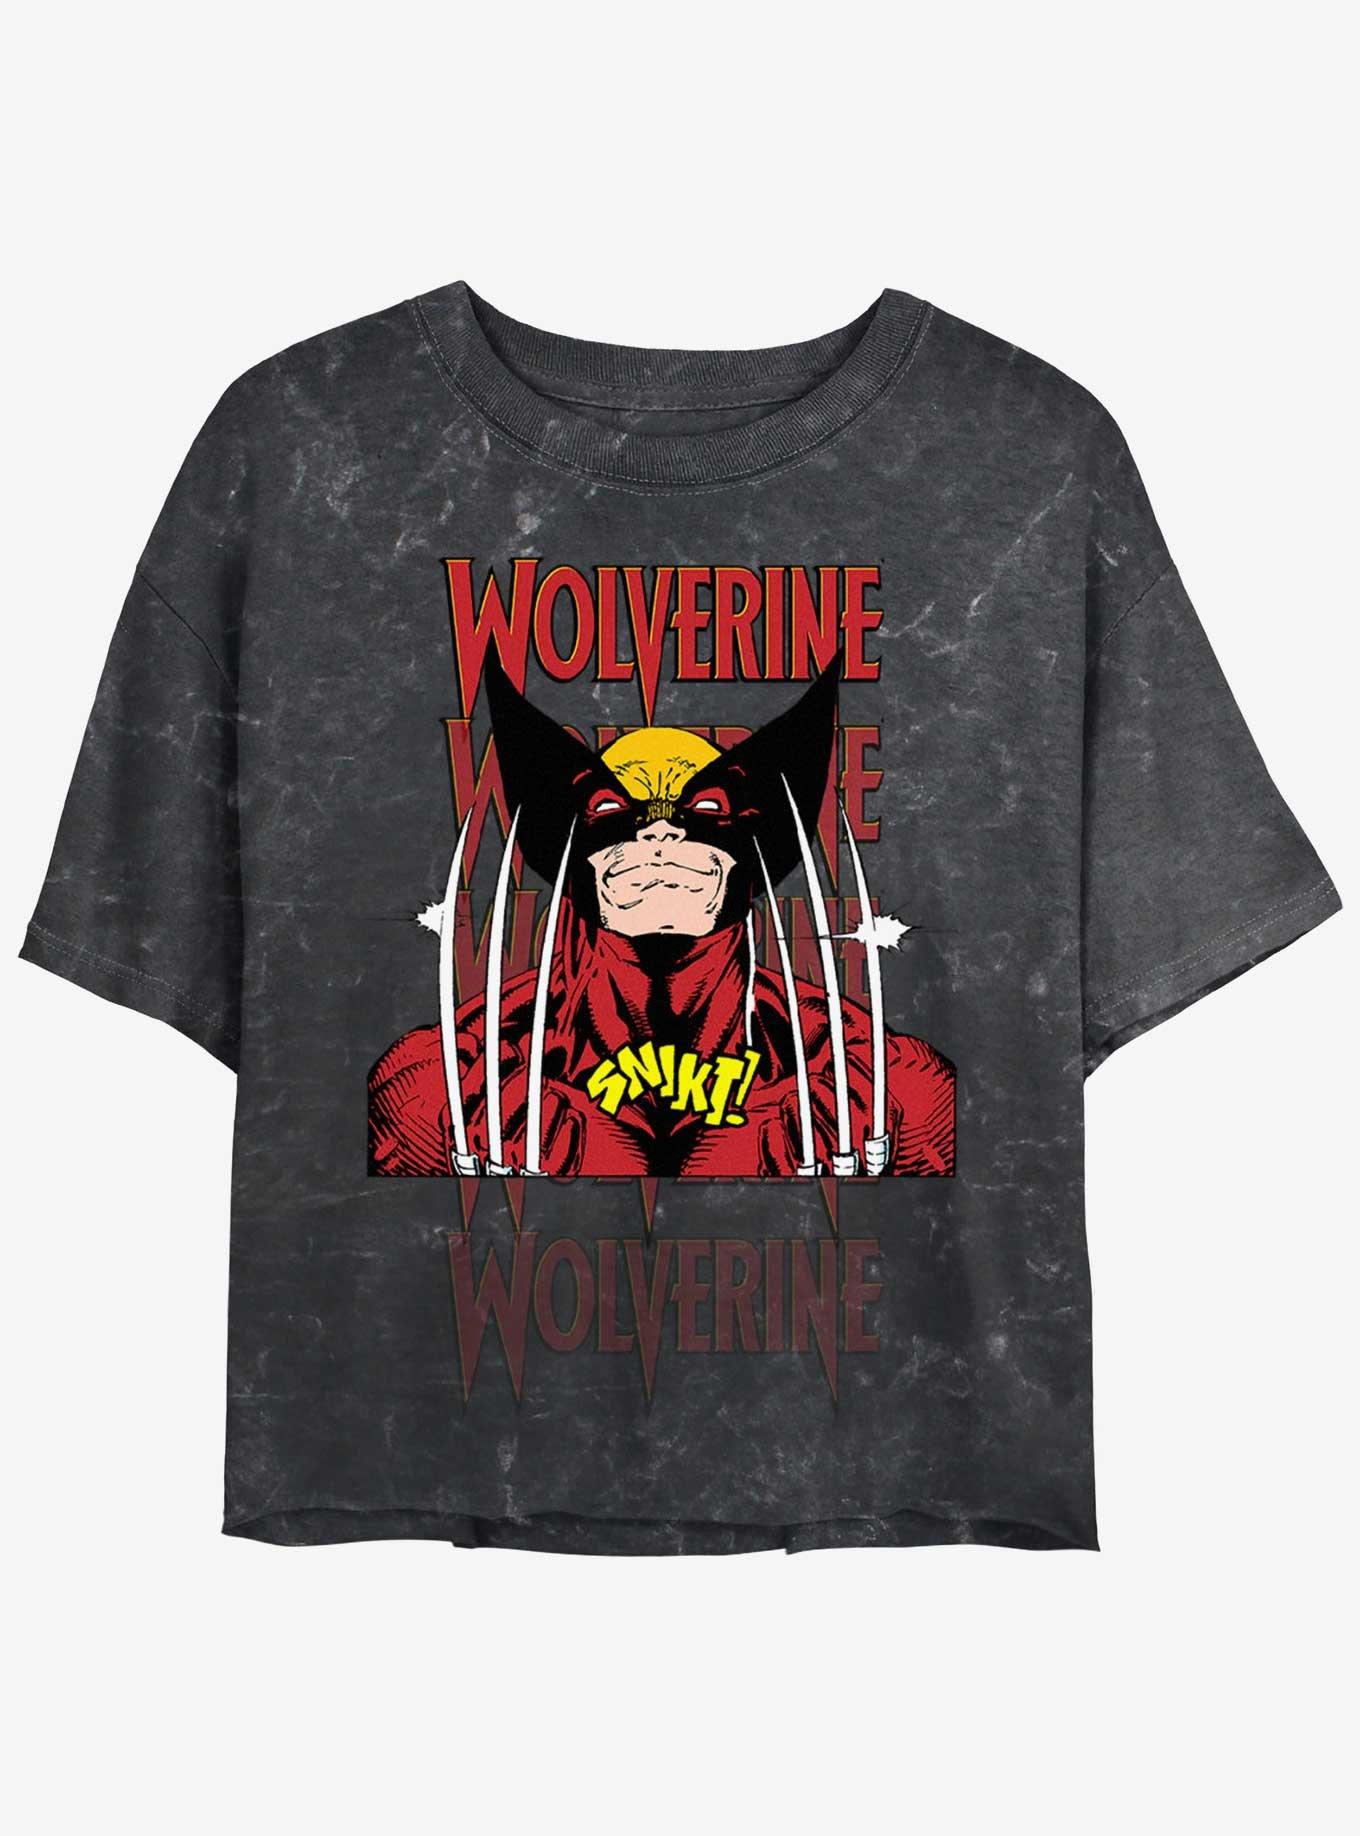 Wolverine Shiny Claws Womens Mineral Wash Crop T-Shirt, BLACK, hi-res